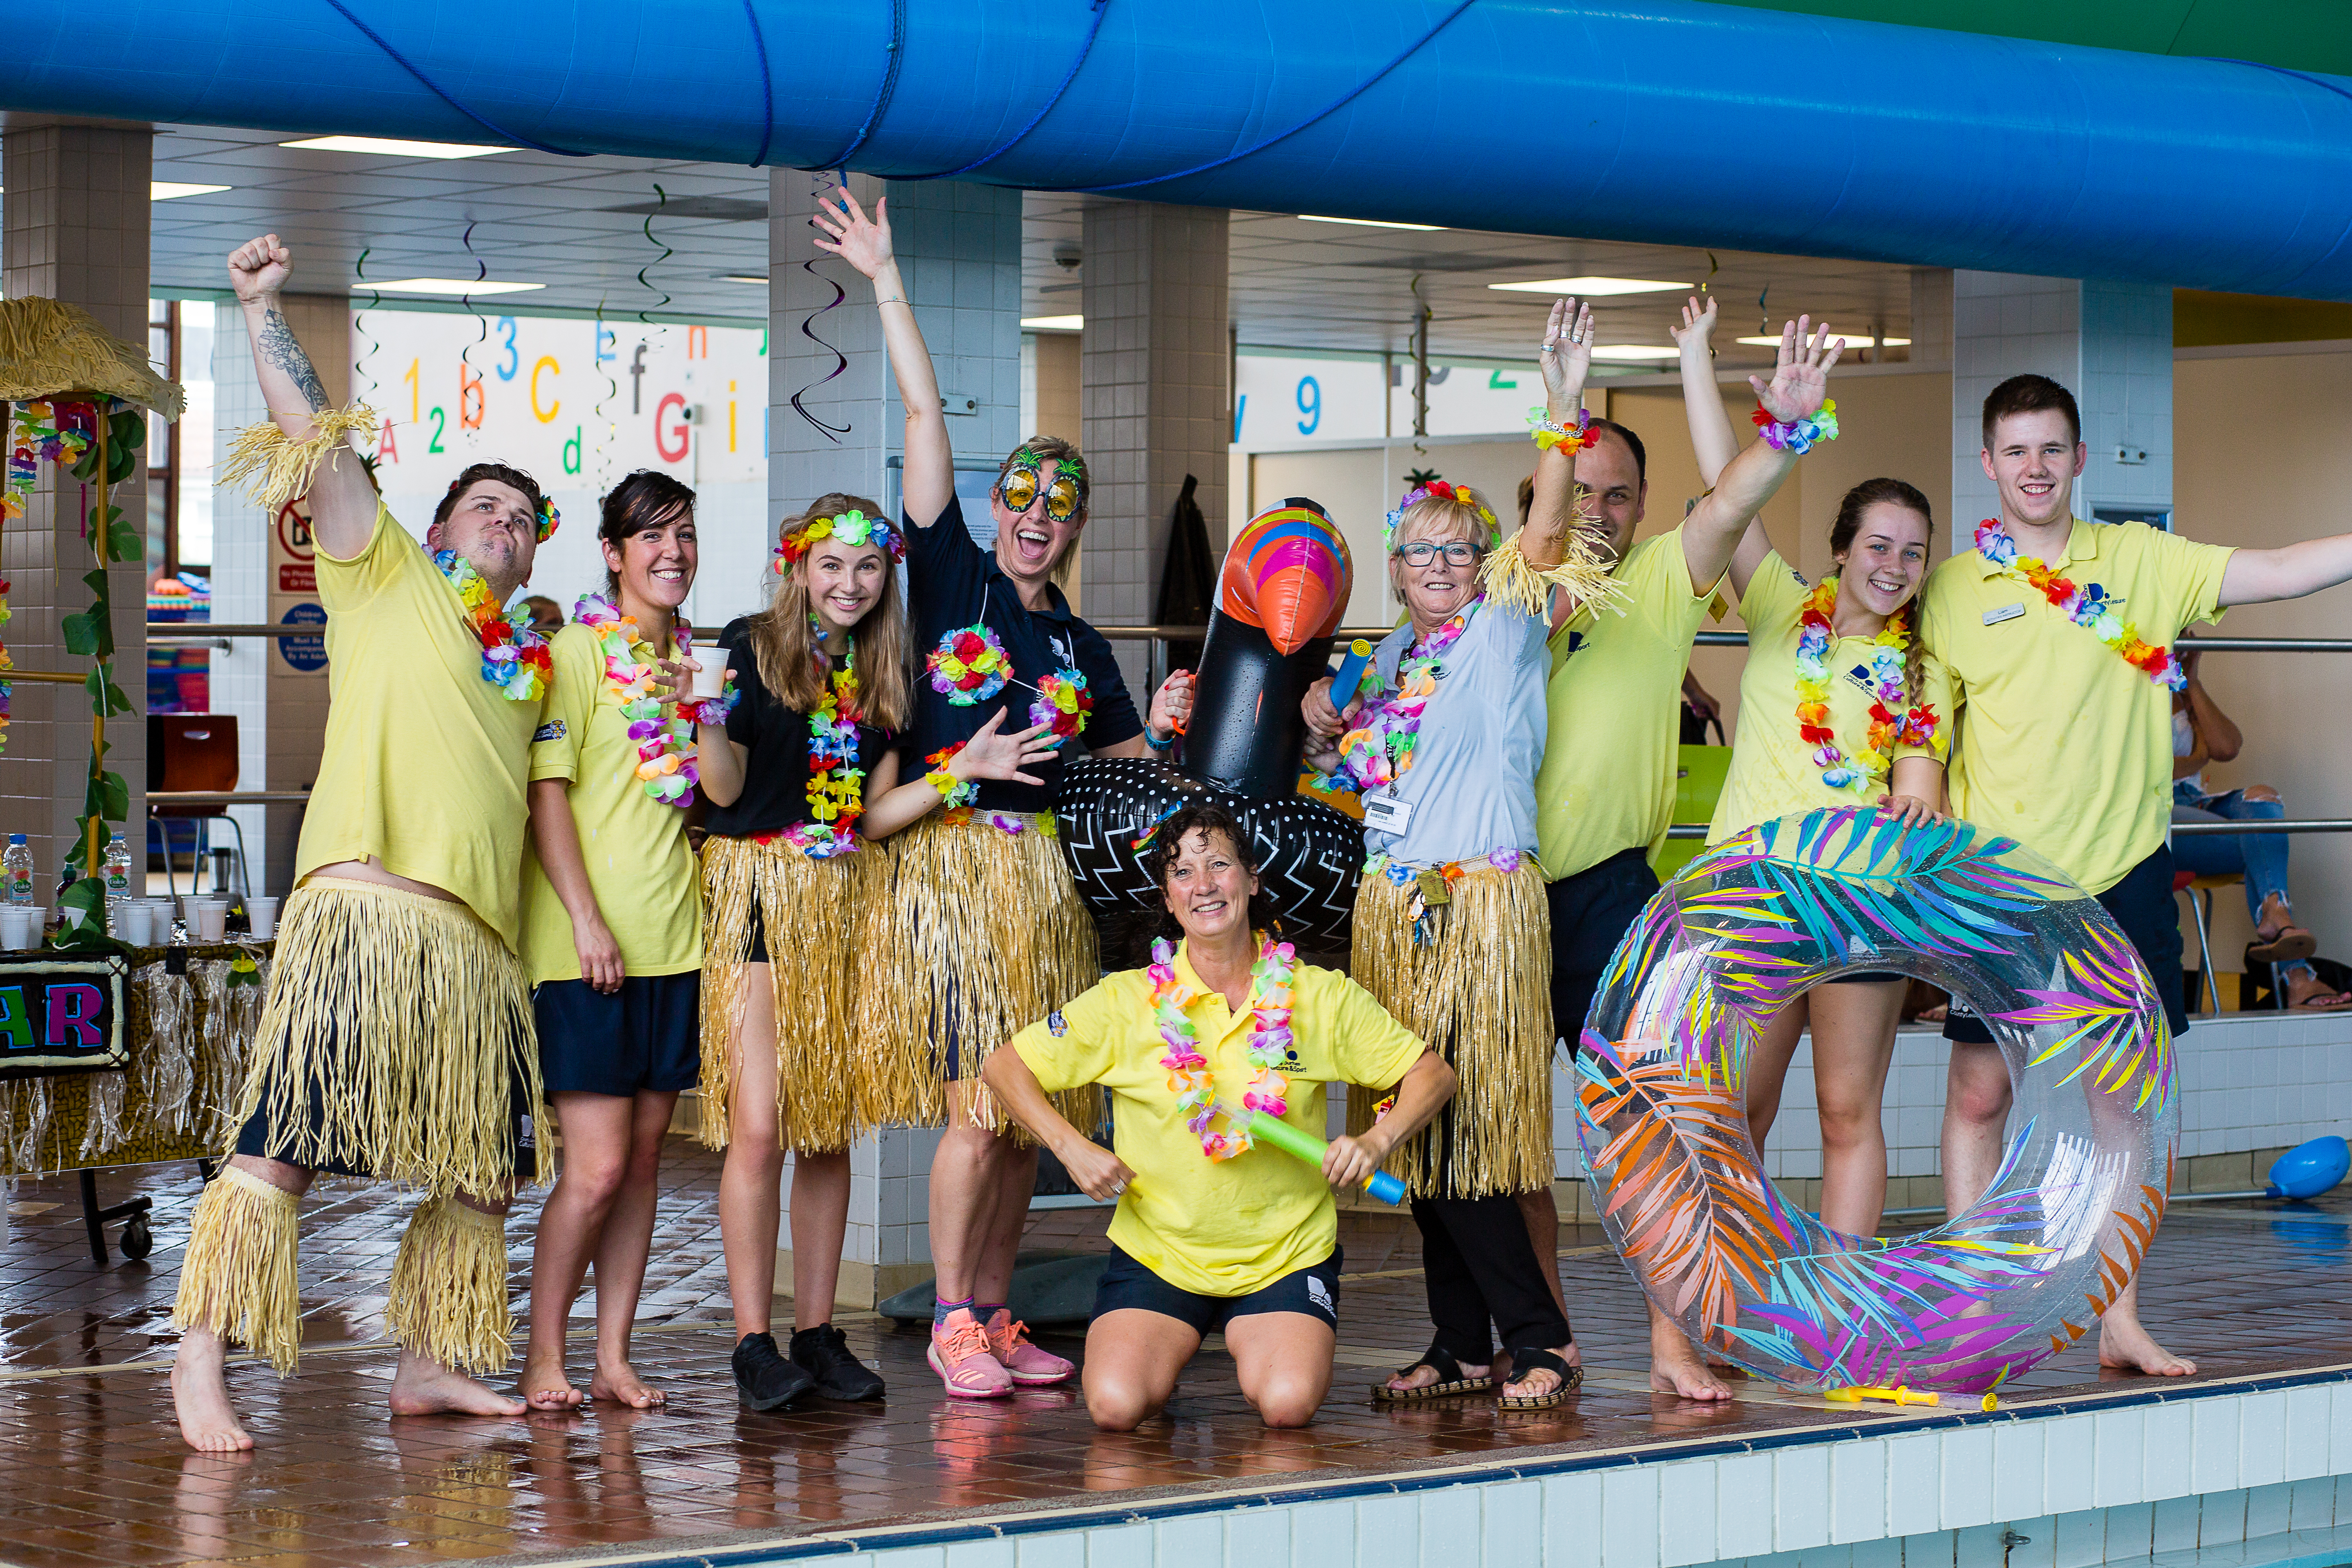 A group of leisure centre staff, dressed in grass skirts and flower garlands, stand and kneel at the side of a pool ready for the start of a themed pool party.